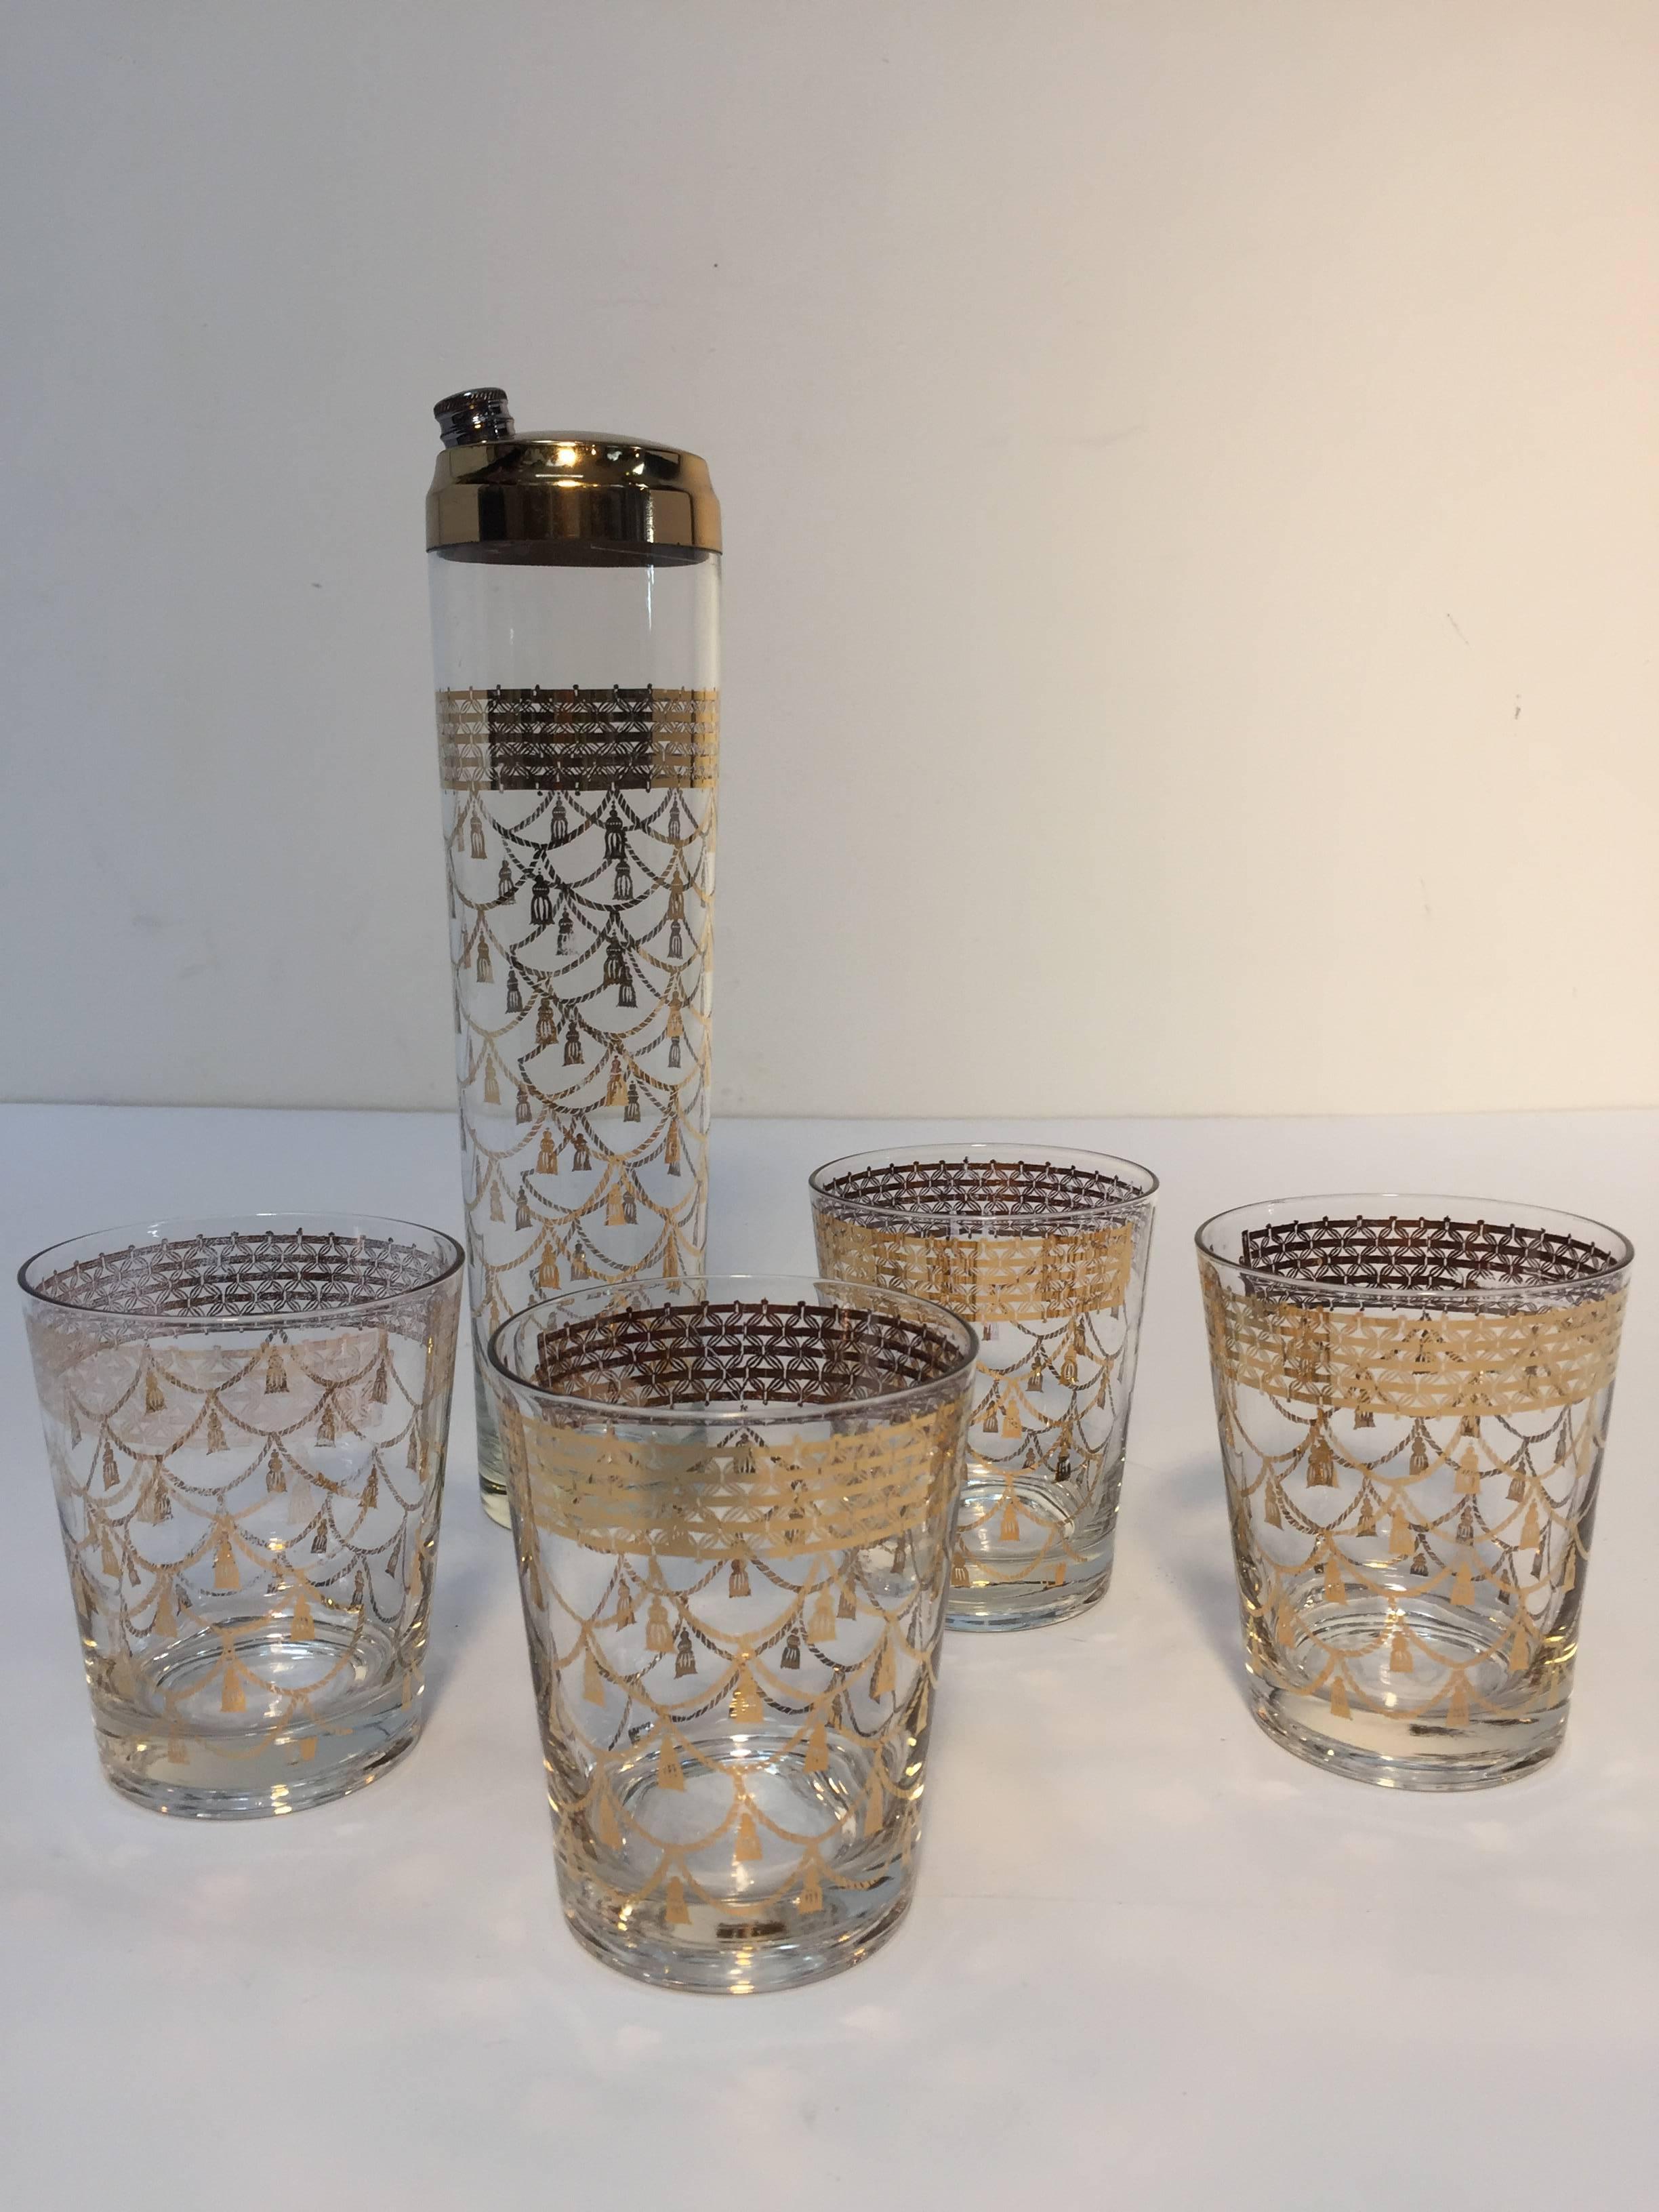 Hollywood regency elegant vintage Culver cocktail set of mid-century barware glasses with 22-karat gold leaf design.
Includes four large cocktail glasses and one cocktail shaker with brass piece top. 
Moroccan themed design with gold tassels, and